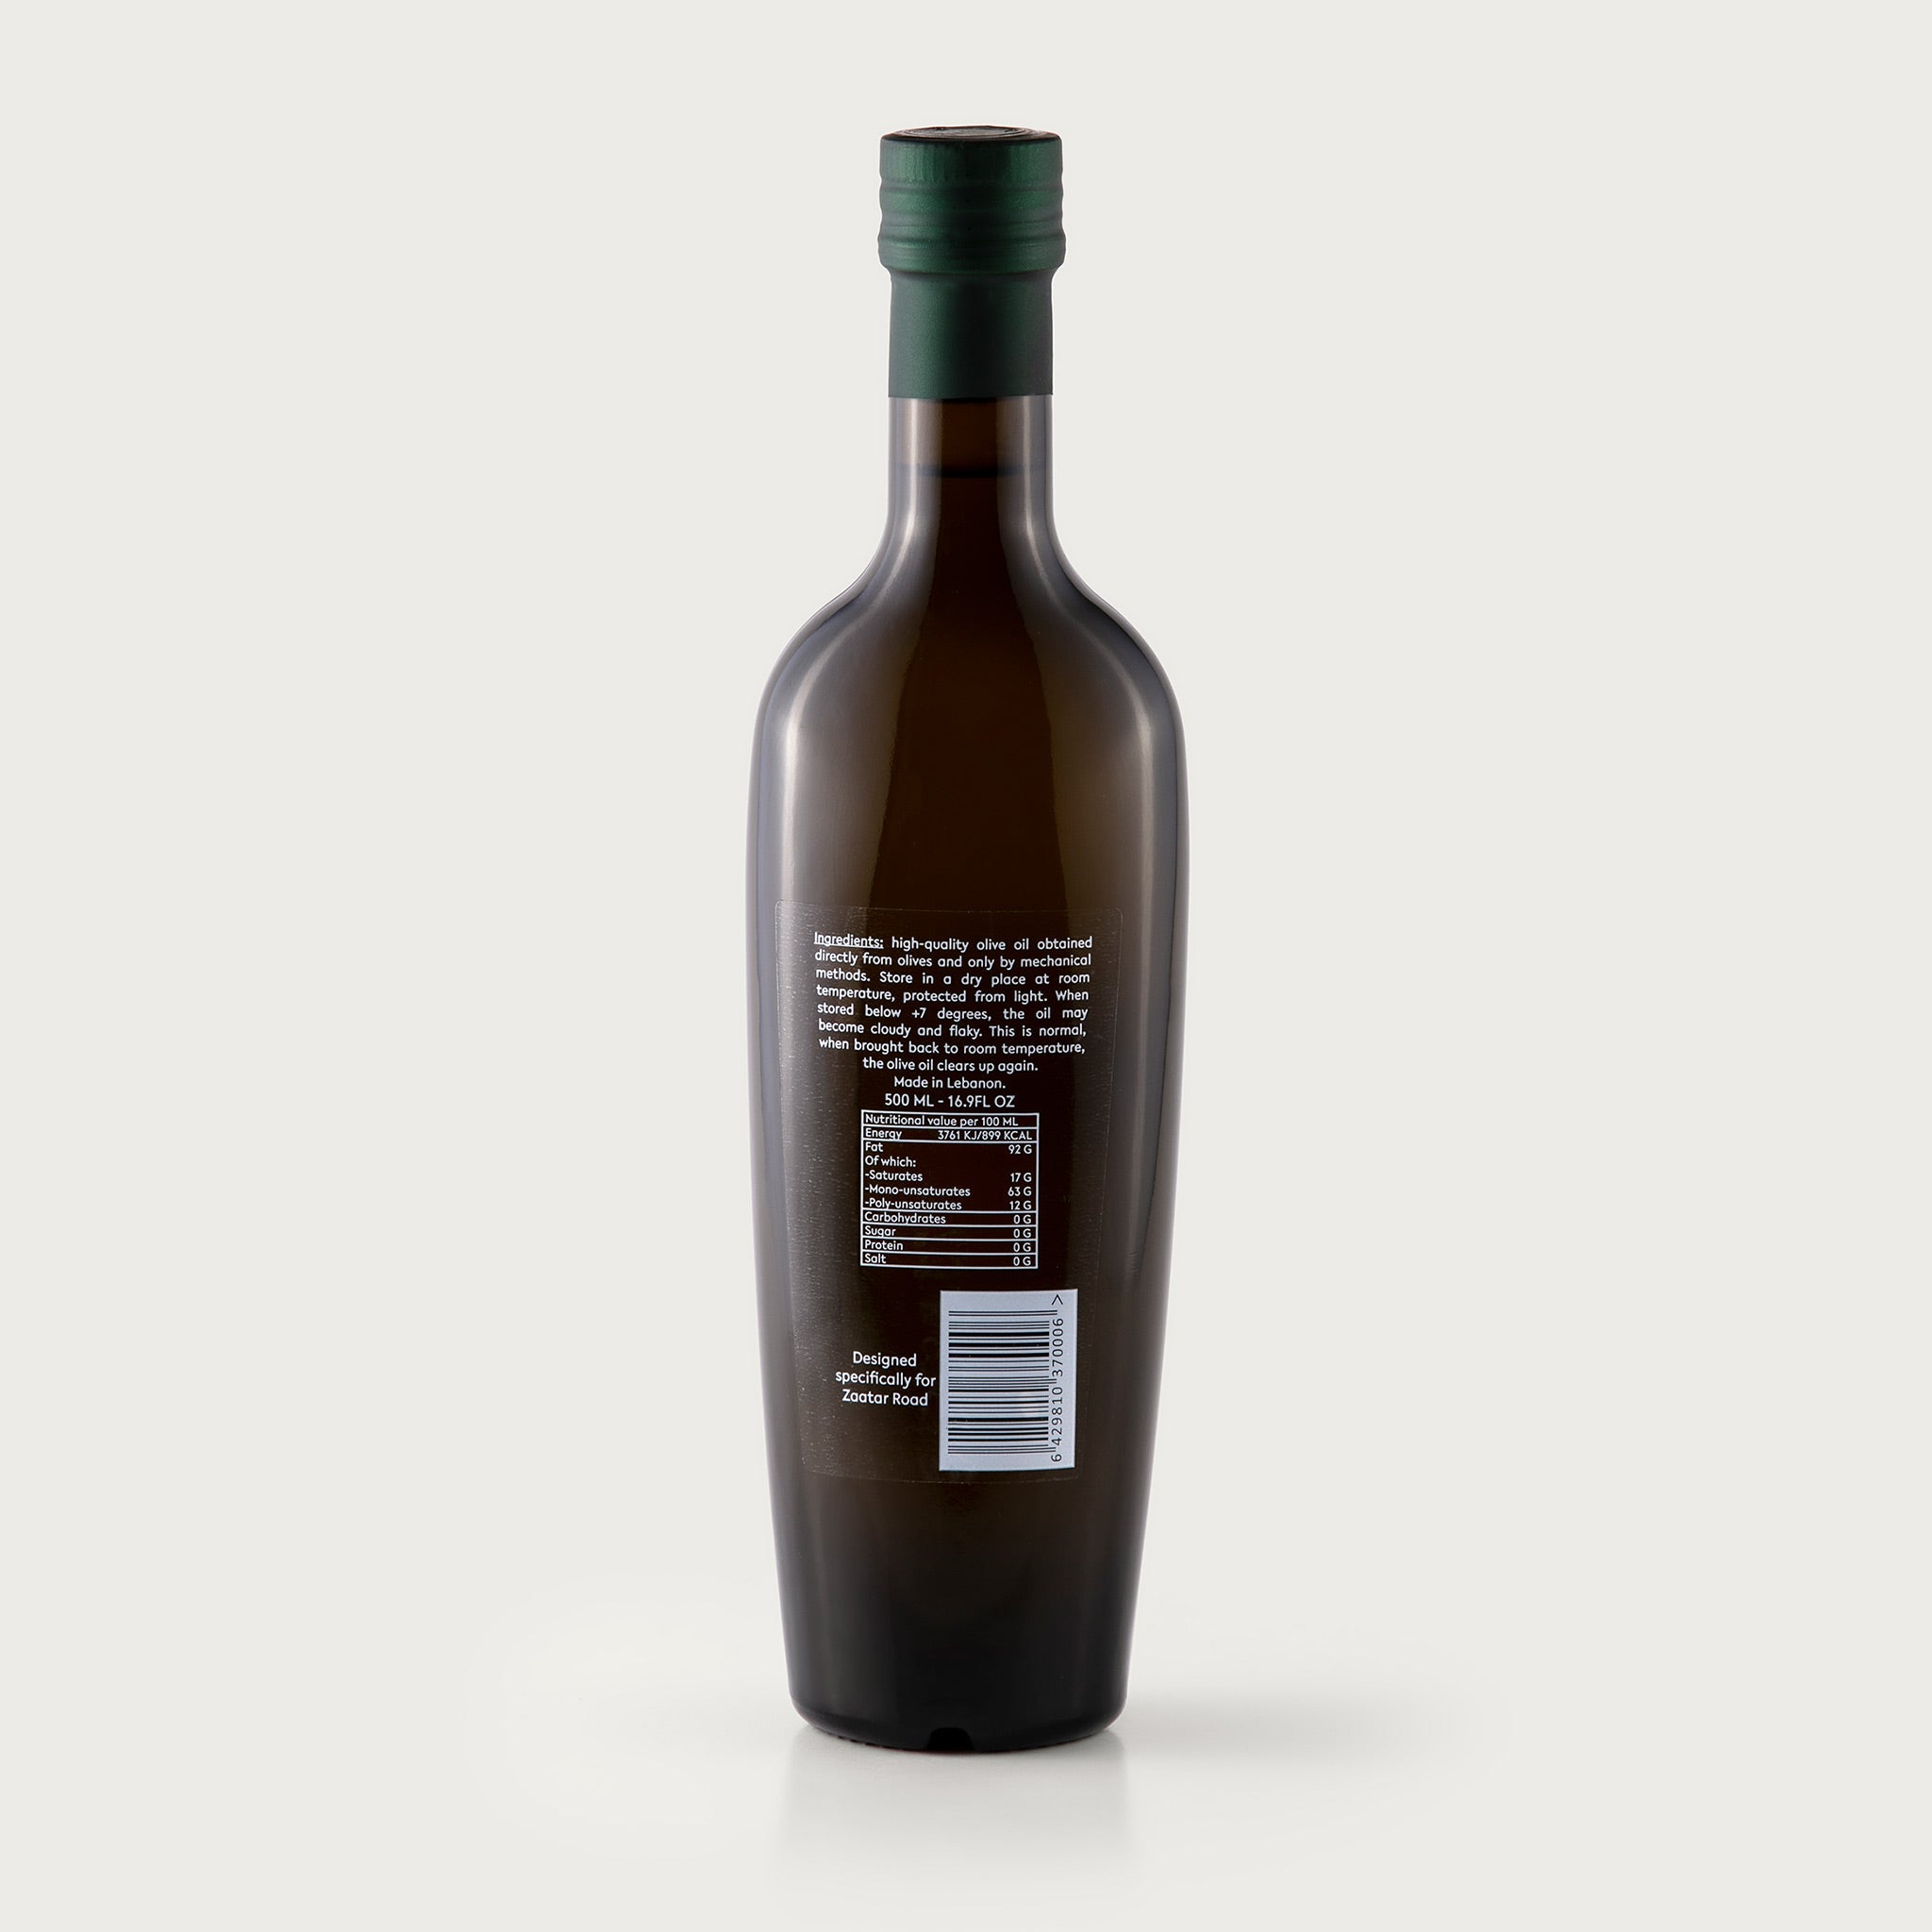 This 16.9 oz bottle of premium filtered olive oil is dark olive in color so it protects the liquid inside. The white MIMAS logo is included on the bottle, with the latitude and longitude 33.3N, 35.5 E, Made in Lebanon, Village of Dier Mimas.